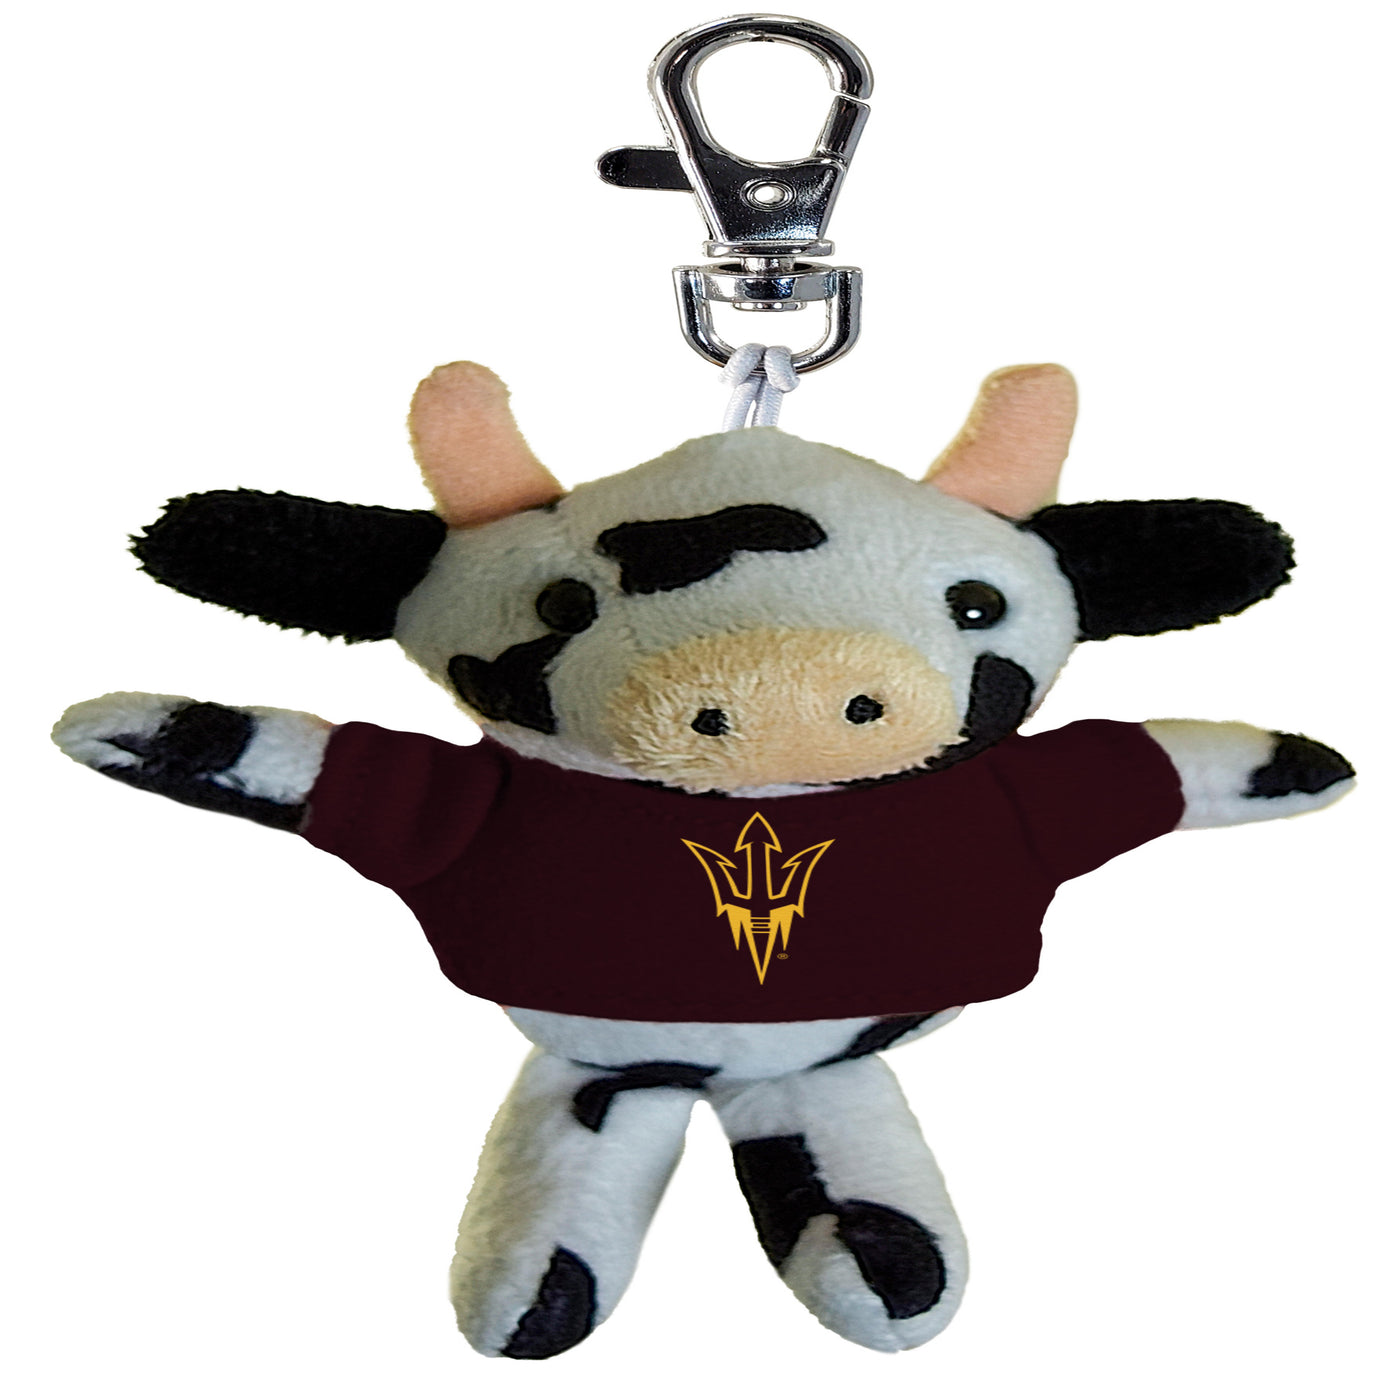 ASU key chain with small black and white cow with horns. The cow is wearing a maroon shirt with a gold pitchfork outline on the chest. 